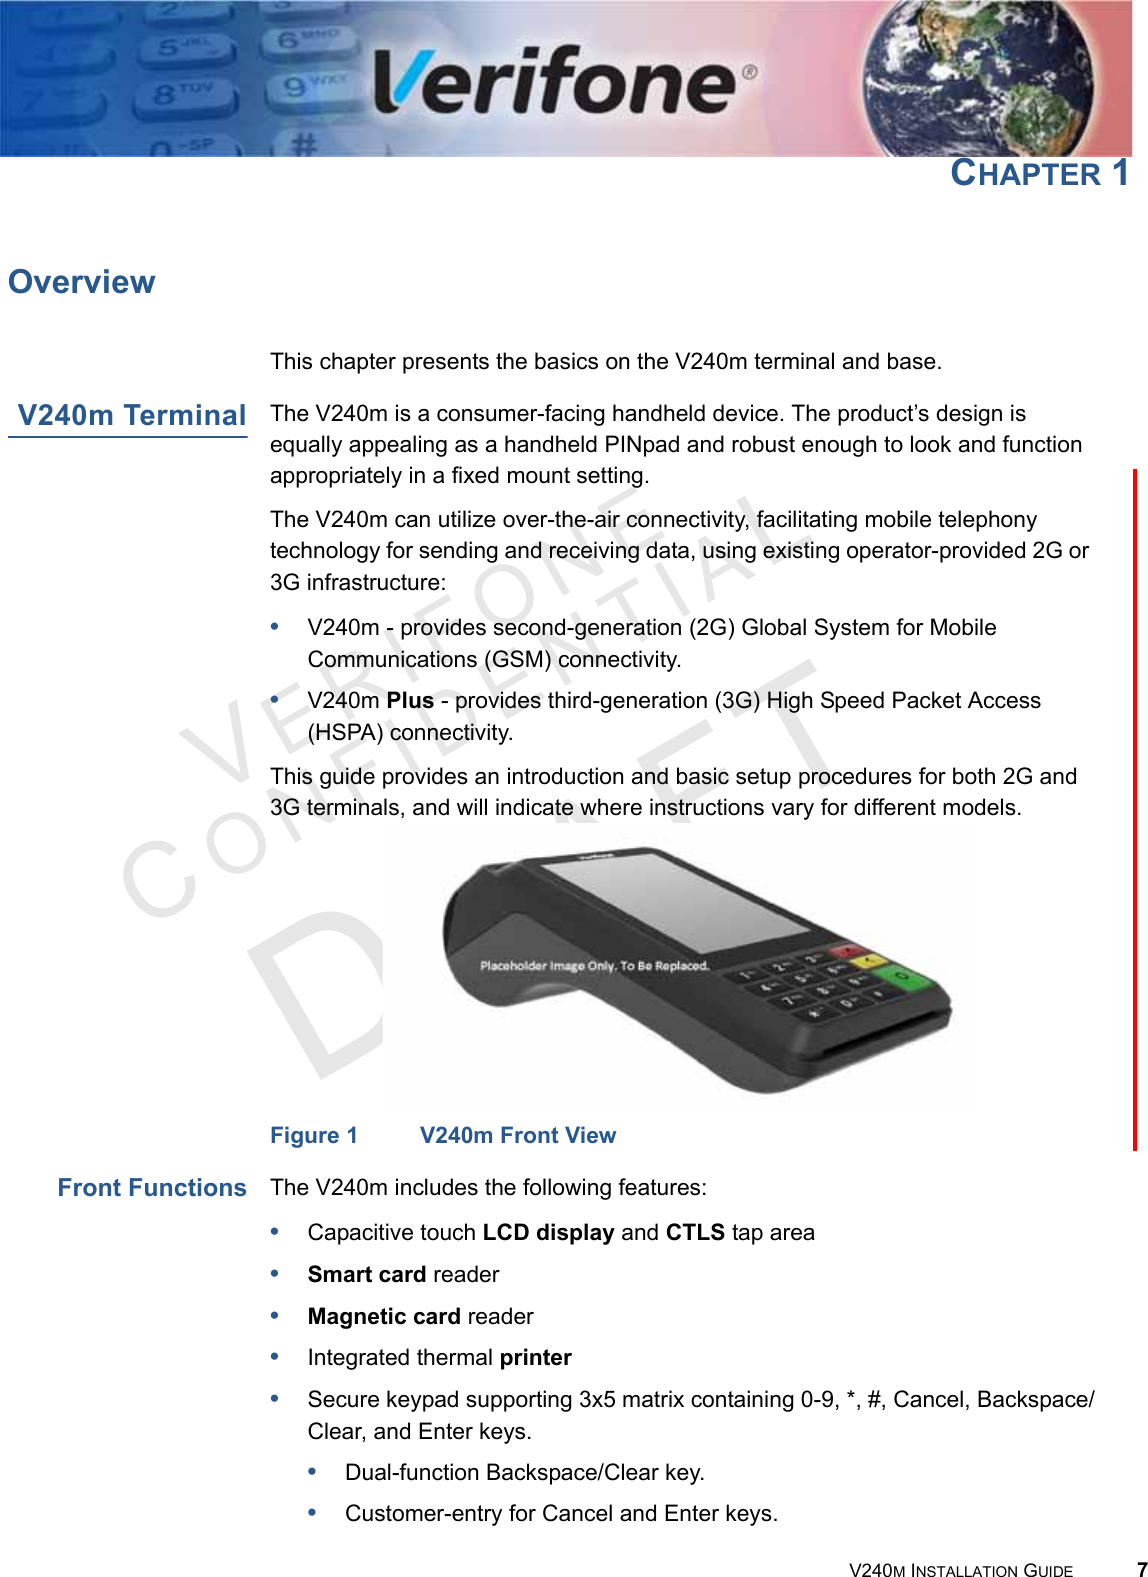 VERIFONECONFIDENTIAL V240M INSTALLATION GUIDE 7CHAPTER 1OverviewThis chapter presents the basics on the V240m terminal and base.V240m Terminal The V240m is a consumer-facing handheld device. The product’s design is equally appealing as a handheld PINpad and robust enough to look and function appropriately in a fixed mount setting.The V240m can utilize over-the-air connectivity, facilitating mobile telephony technology for sending and receiving data, using existing operator-provided 2G or 3G infrastructure:•V240m - provides second-generation (2G) Global System for Mobile Communications (GSM) connectivity.•V240m Plus - provides third-generation (3G) High Speed Packet Access (HSPA) connectivity.This guide provides an introduction and basic setup procedures for both 2G and 3G terminals, and will indicate where instructions vary for different models. Figure 1 V240m Front ViewFront Functions The V240m includes the following features:•Capacitive touch LCD display and CTLS tap area•Smart card reader•Magnetic card reader•Integrated thermal printer•Secure keypad supporting 3x5 matrix containing 0-9, *, #, Cancel, Backspace/Clear, and Enter keys.•Dual-function Backspace/Clear key.•Customer-entry for Cancel and Enter keys.